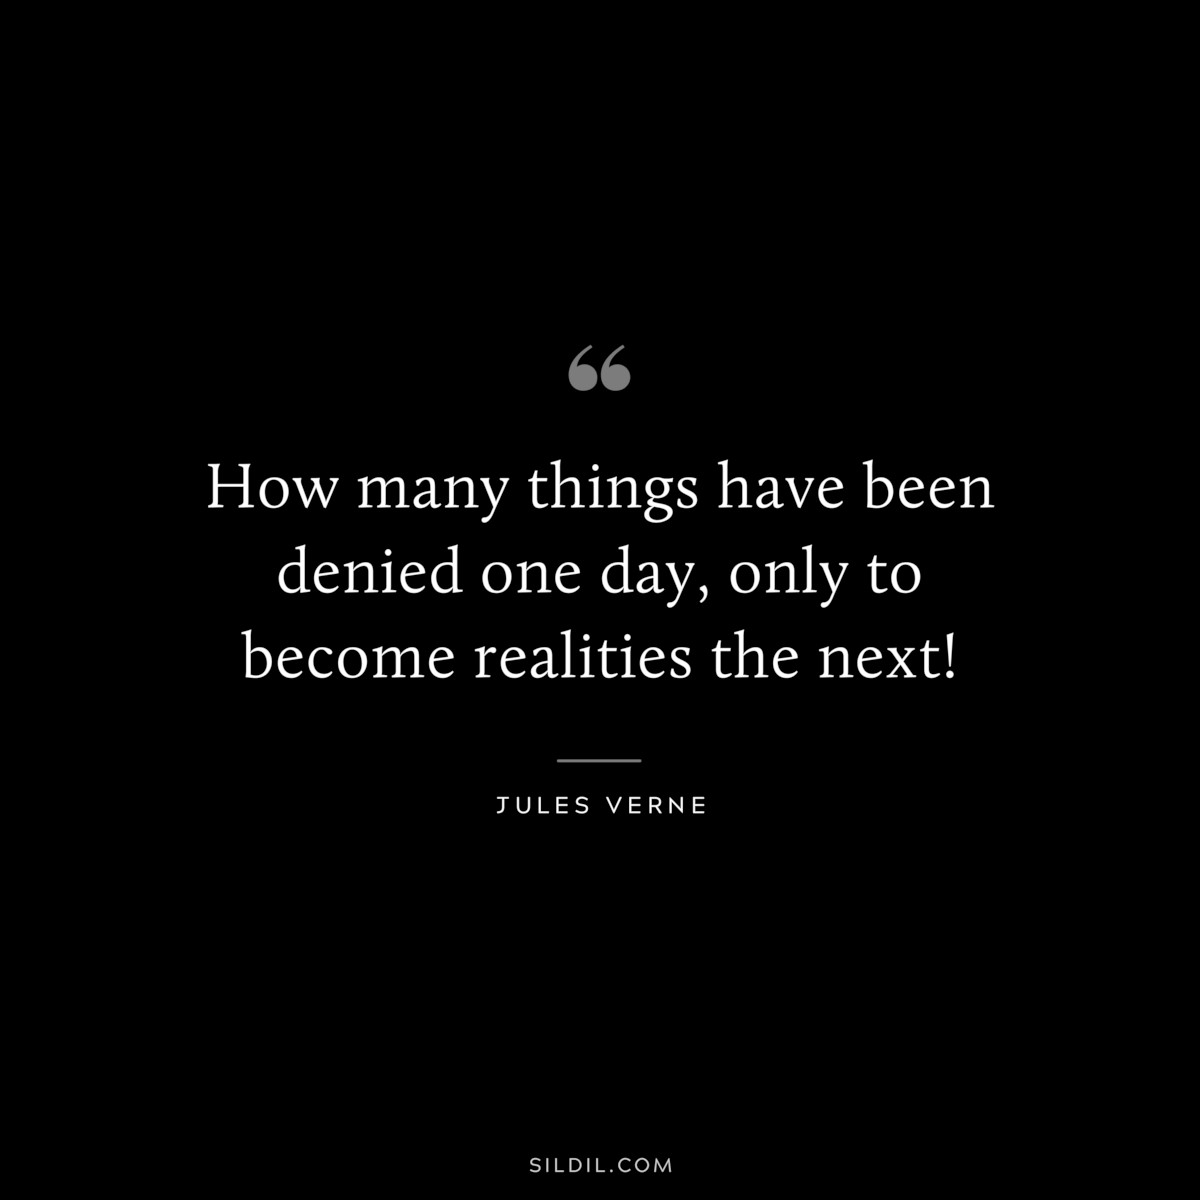 How many things have been denied one day, only to become realities the next!